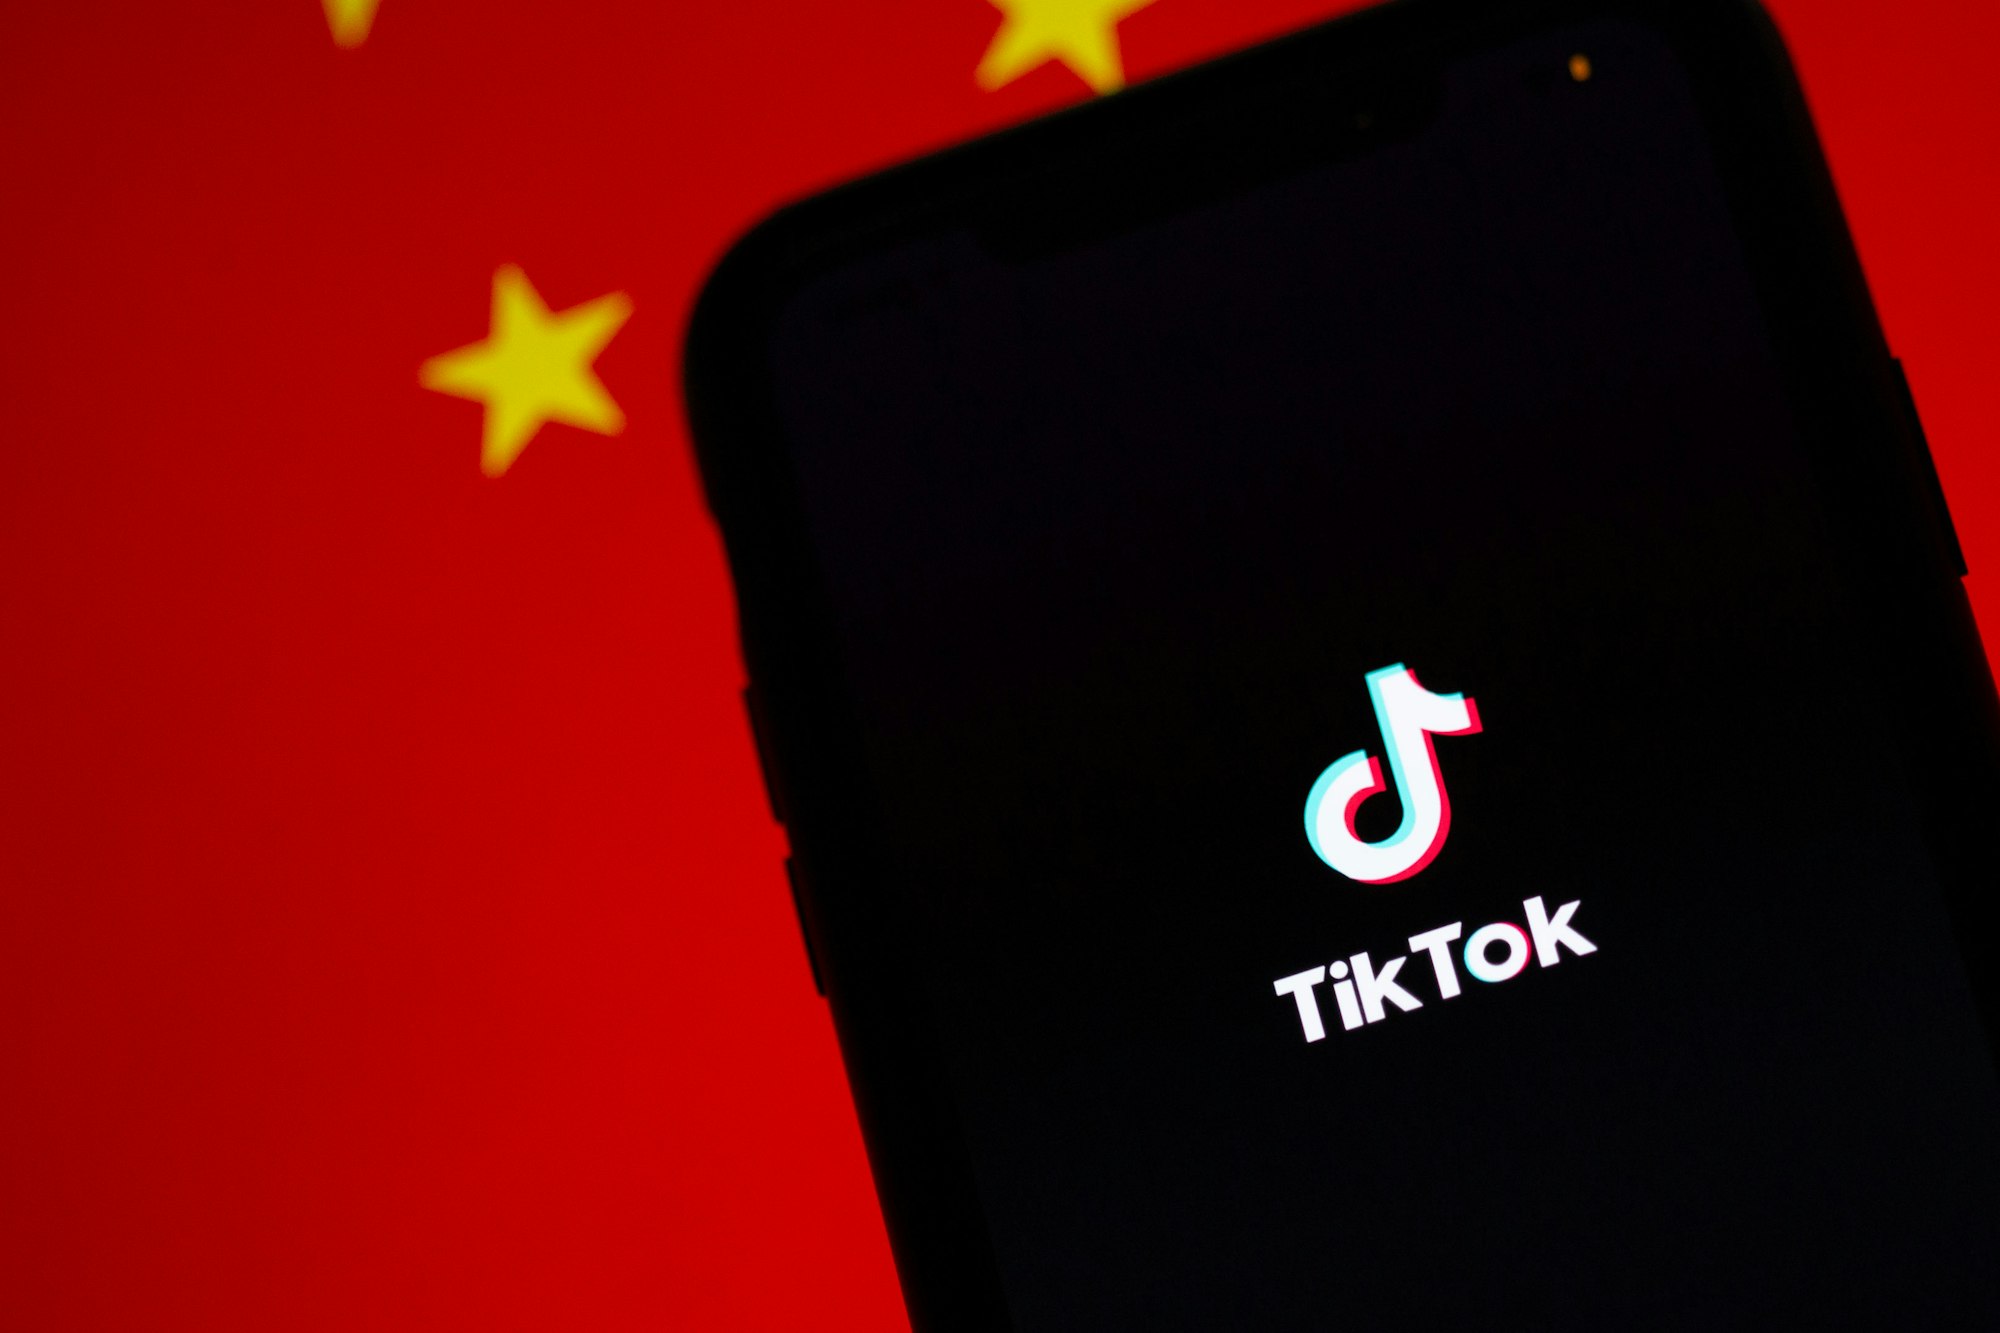 TikTok running on an iPhone. China's flag is displayed behind it.